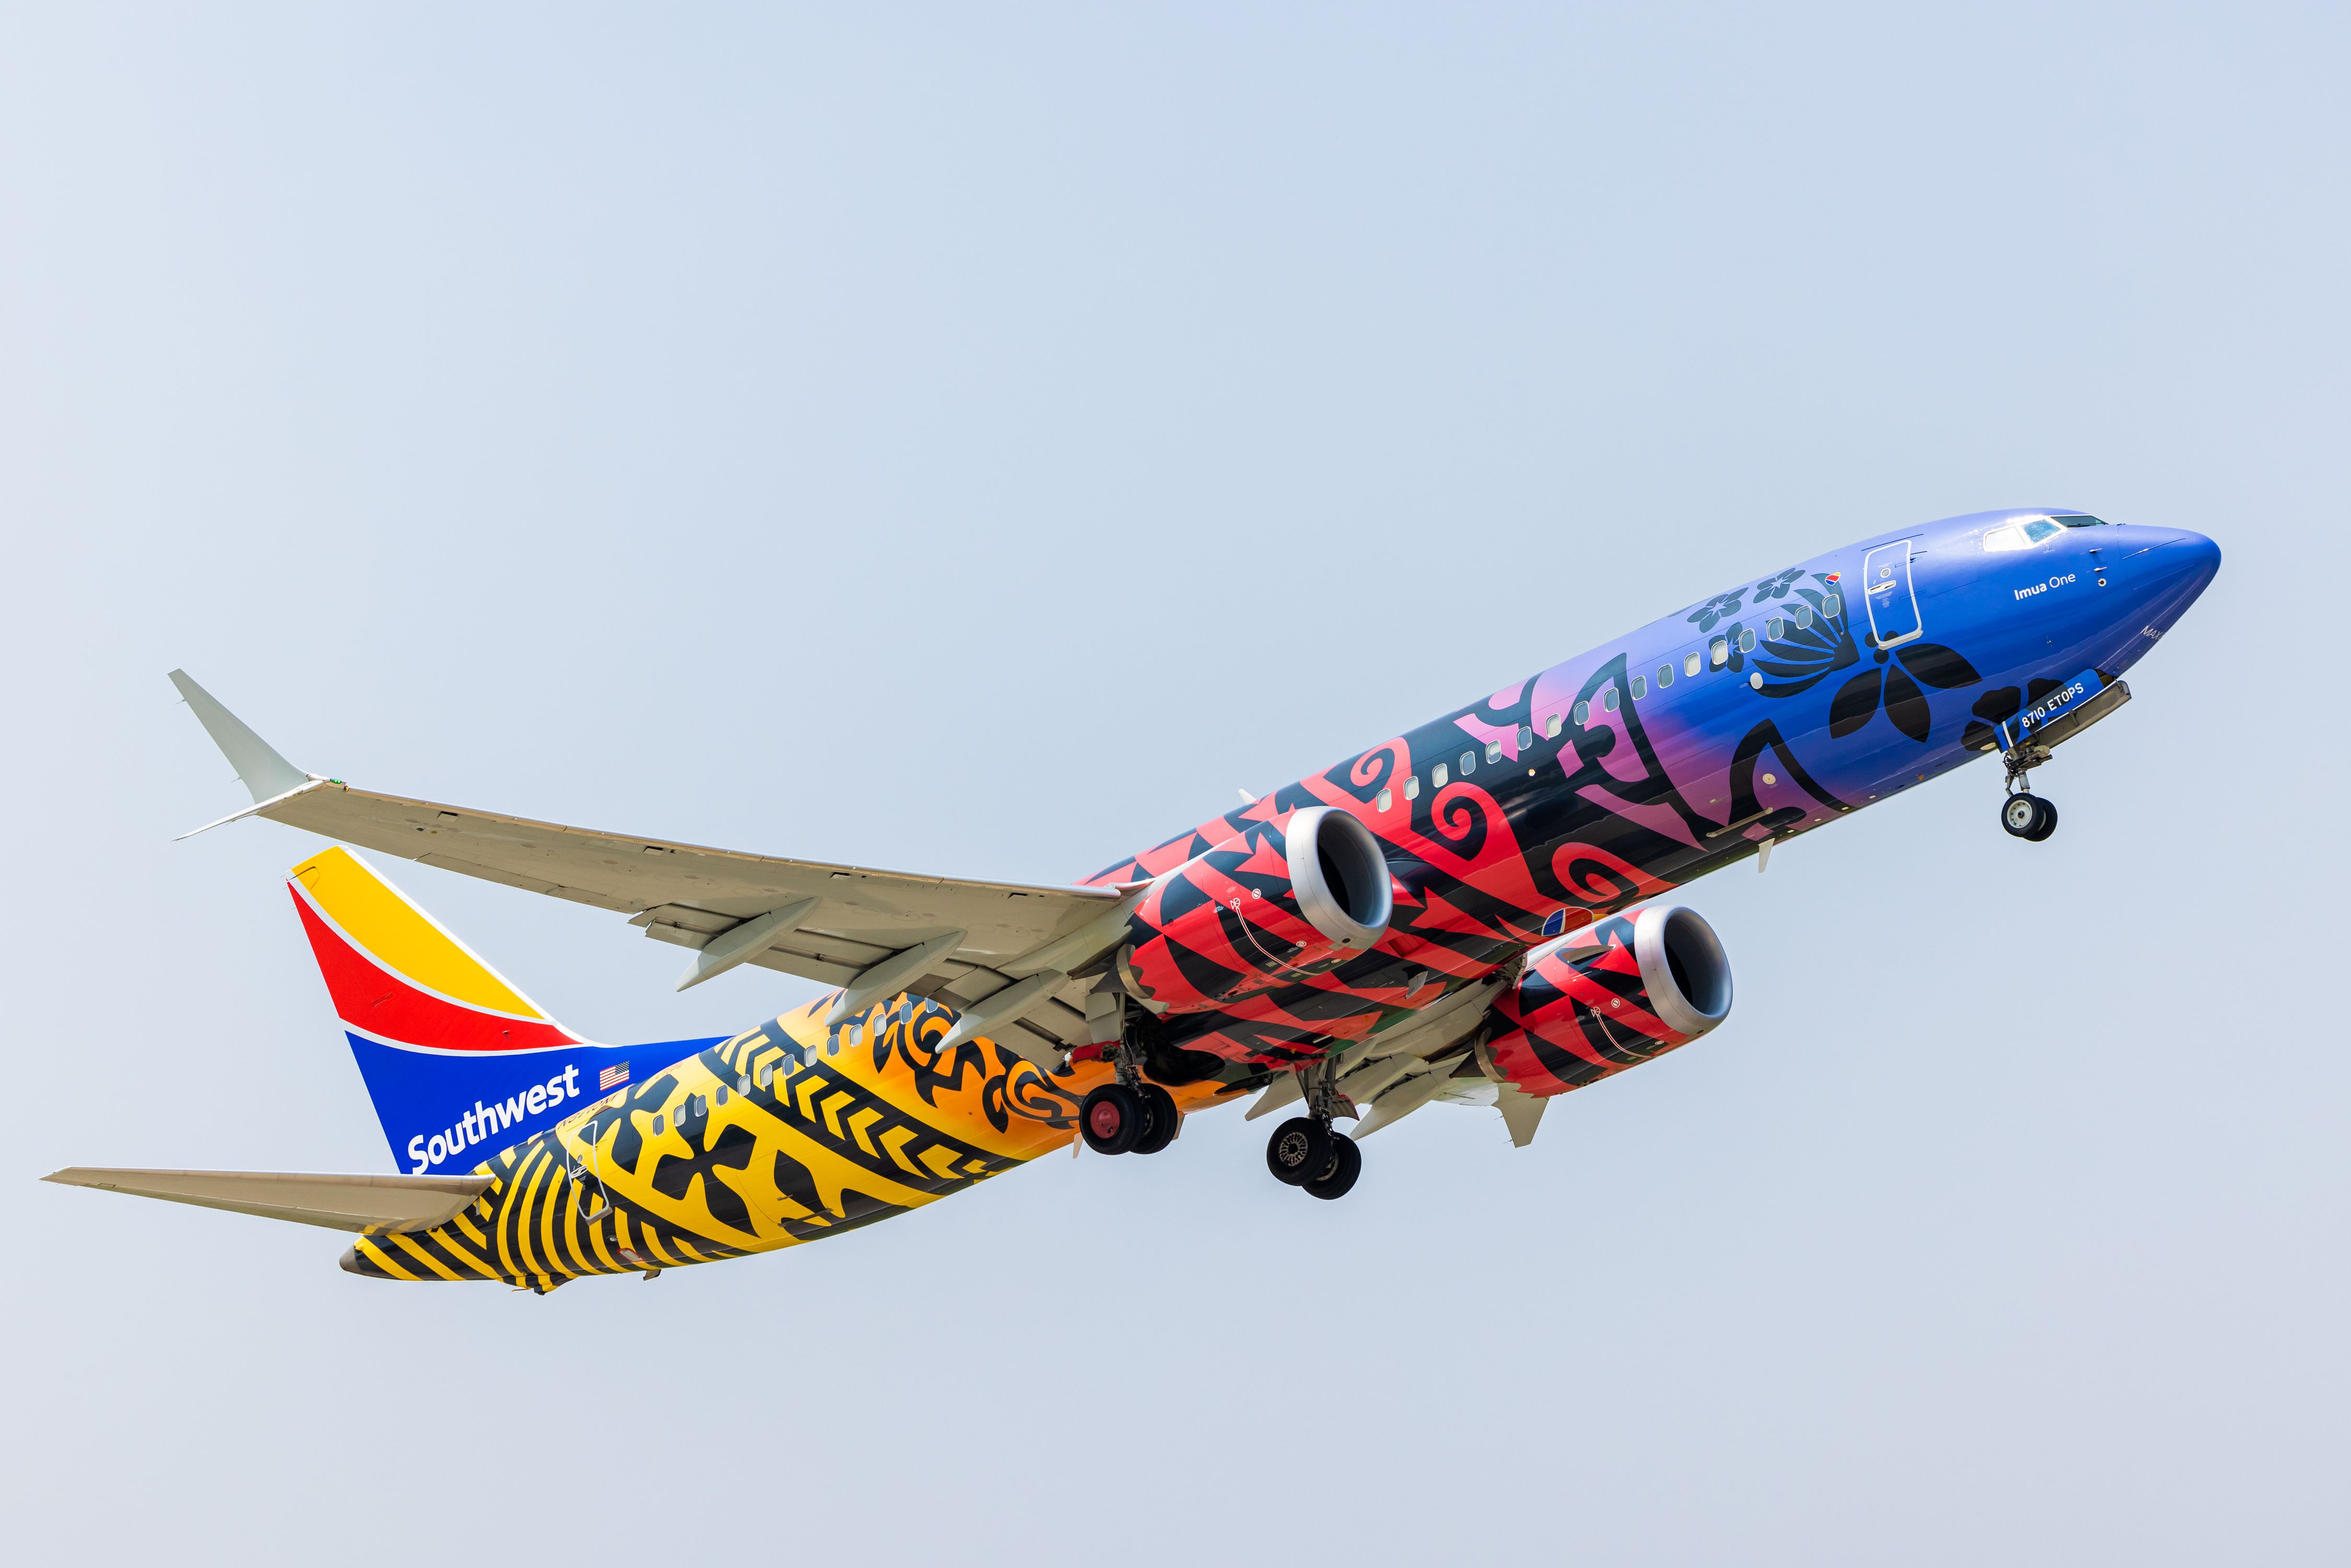 A Southwest Airlines Boeing 737 with a special livery flying in the sky.